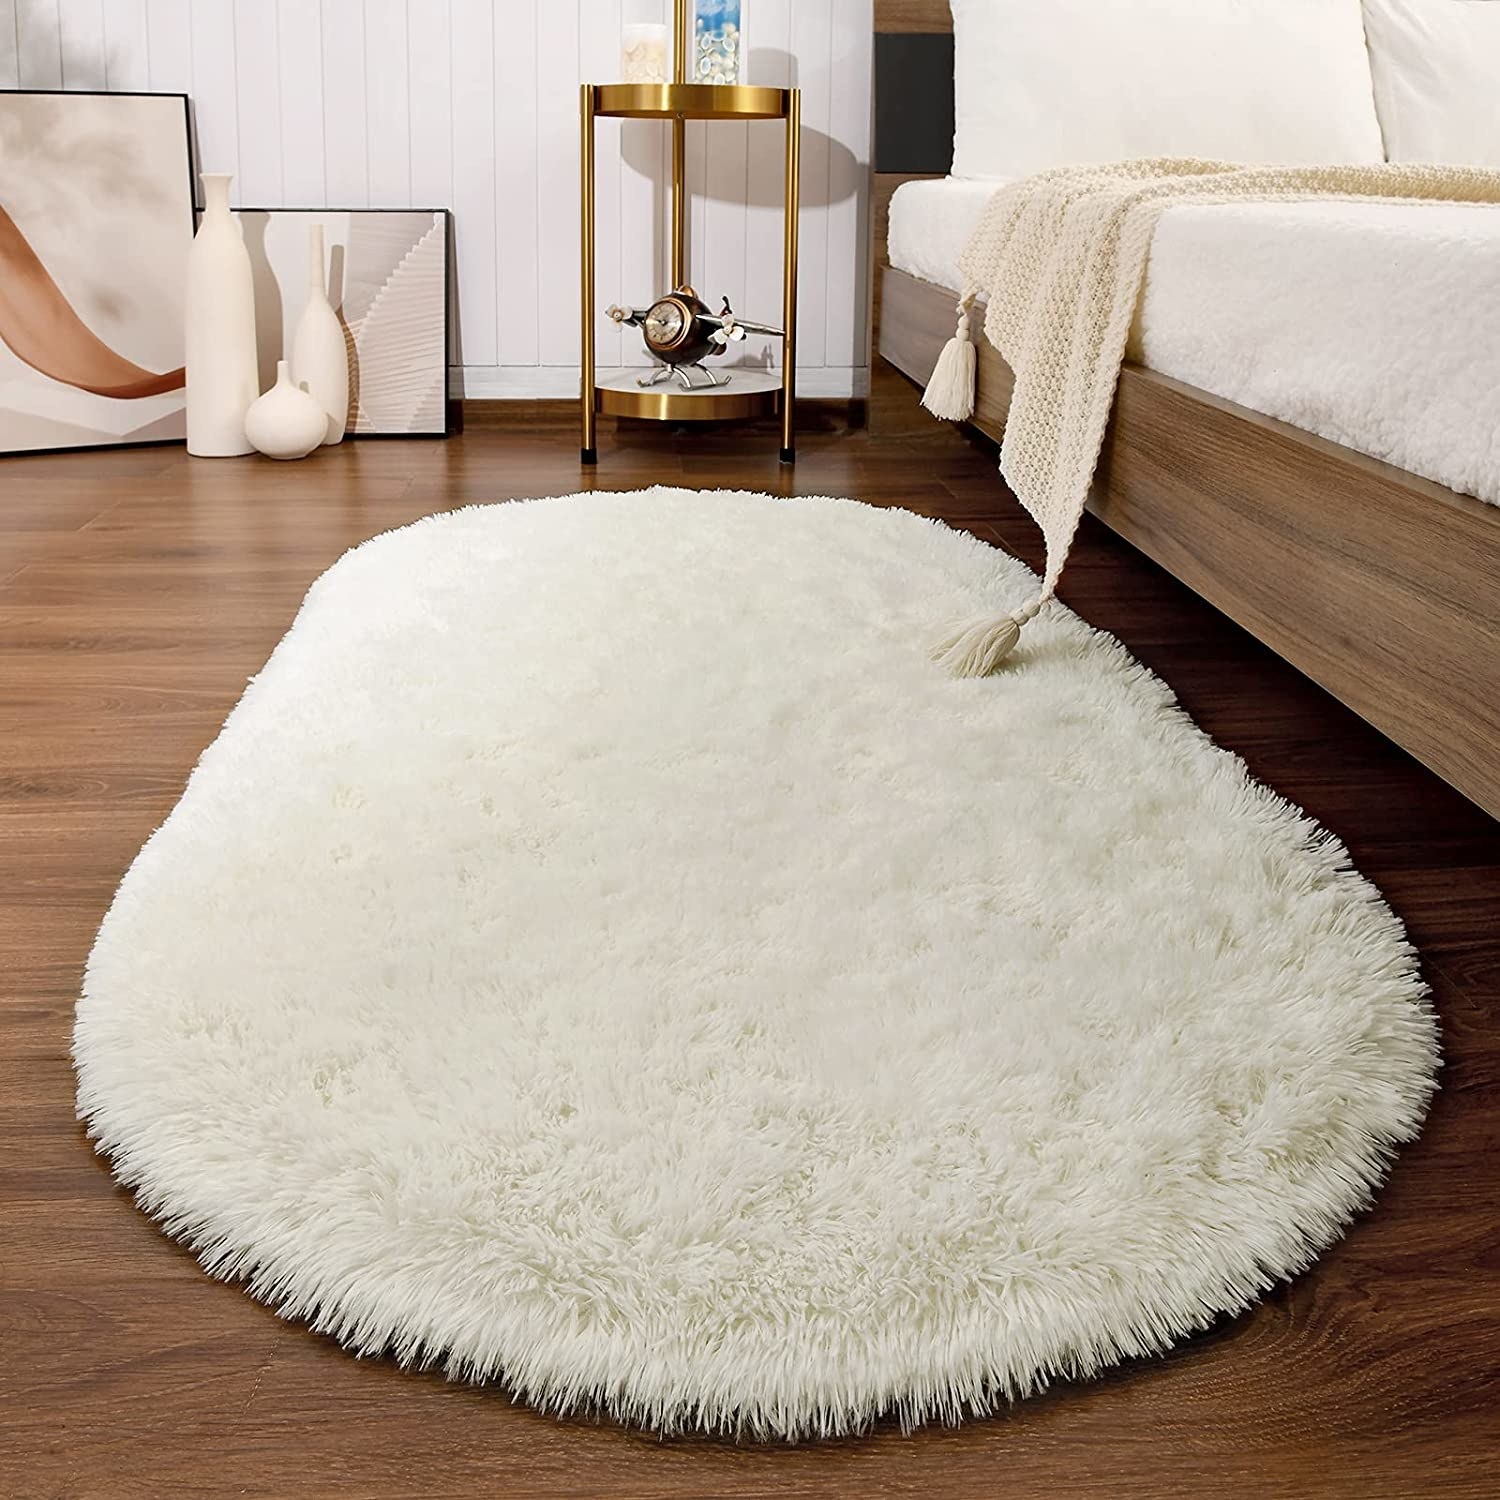 The rug in white next to a bed